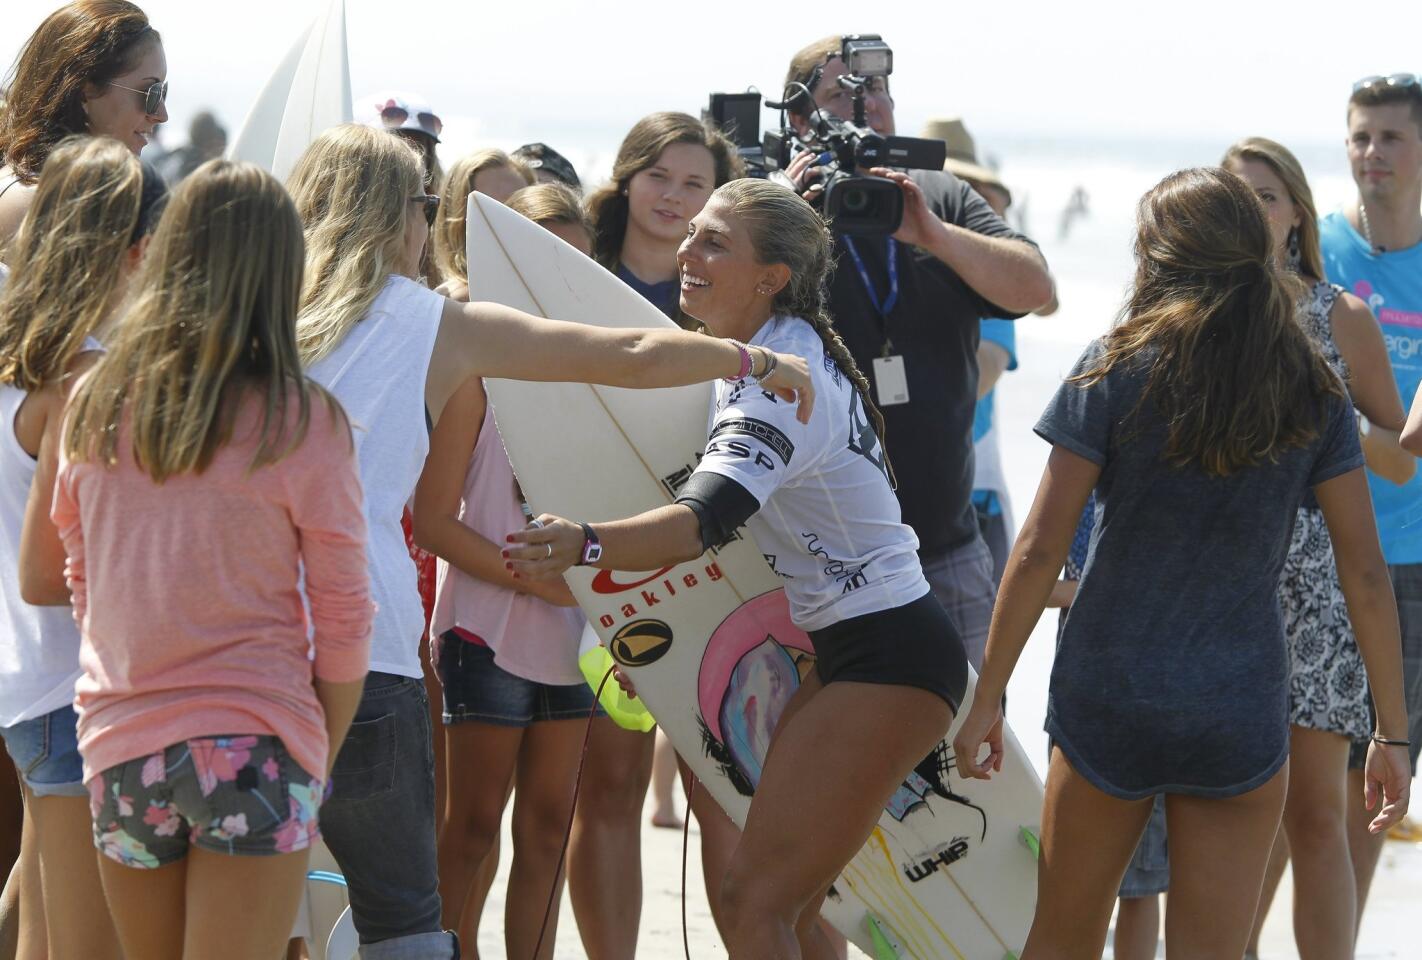 California surfer Sage Erickson is greeted by fans after her heat.